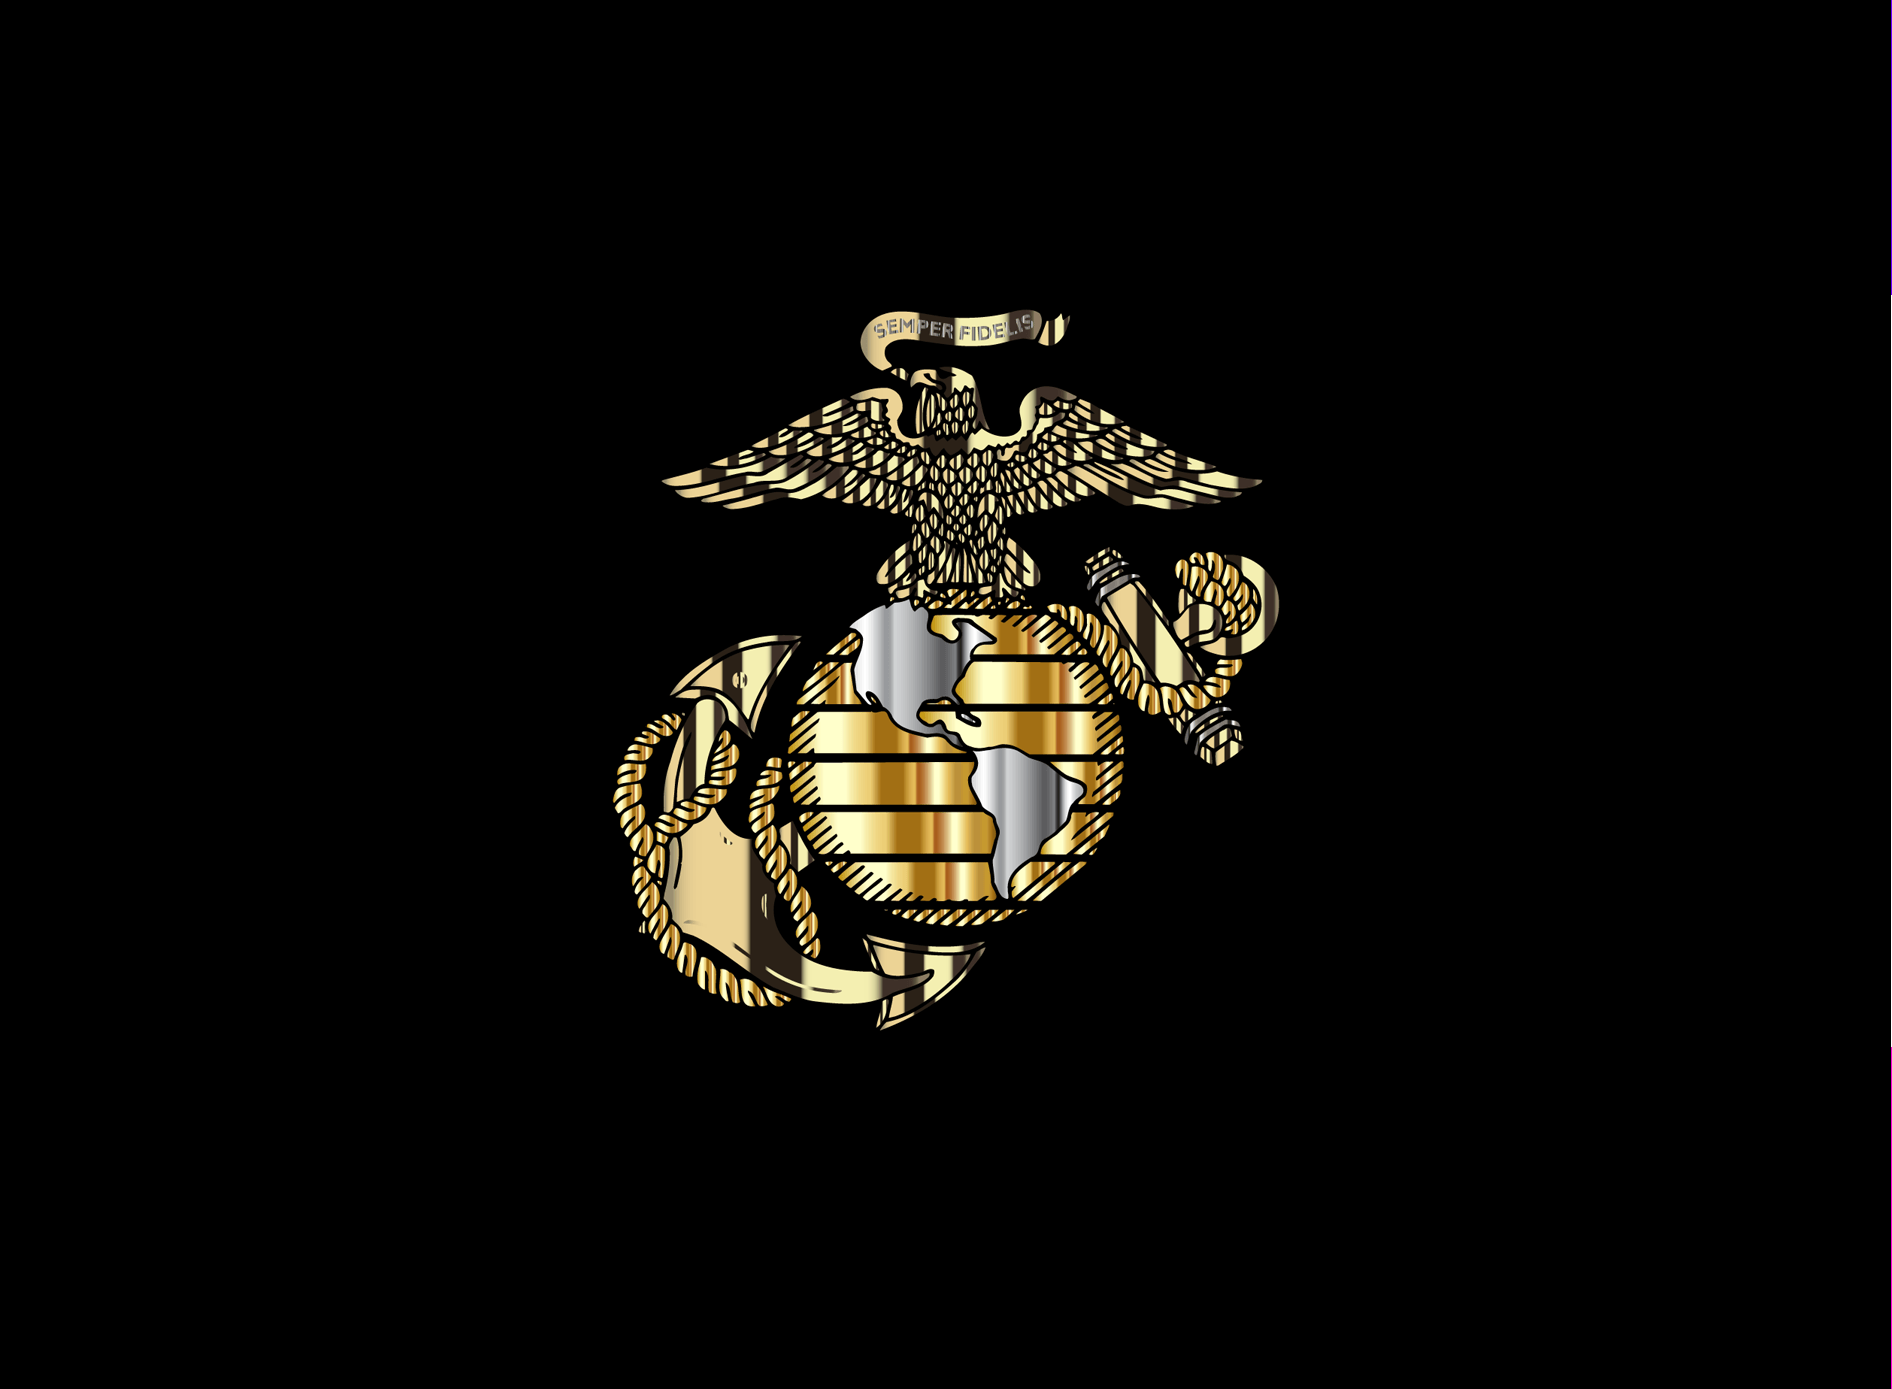 Us Marine Corps Iphone Wallpapers Top Free Us Marine Corps